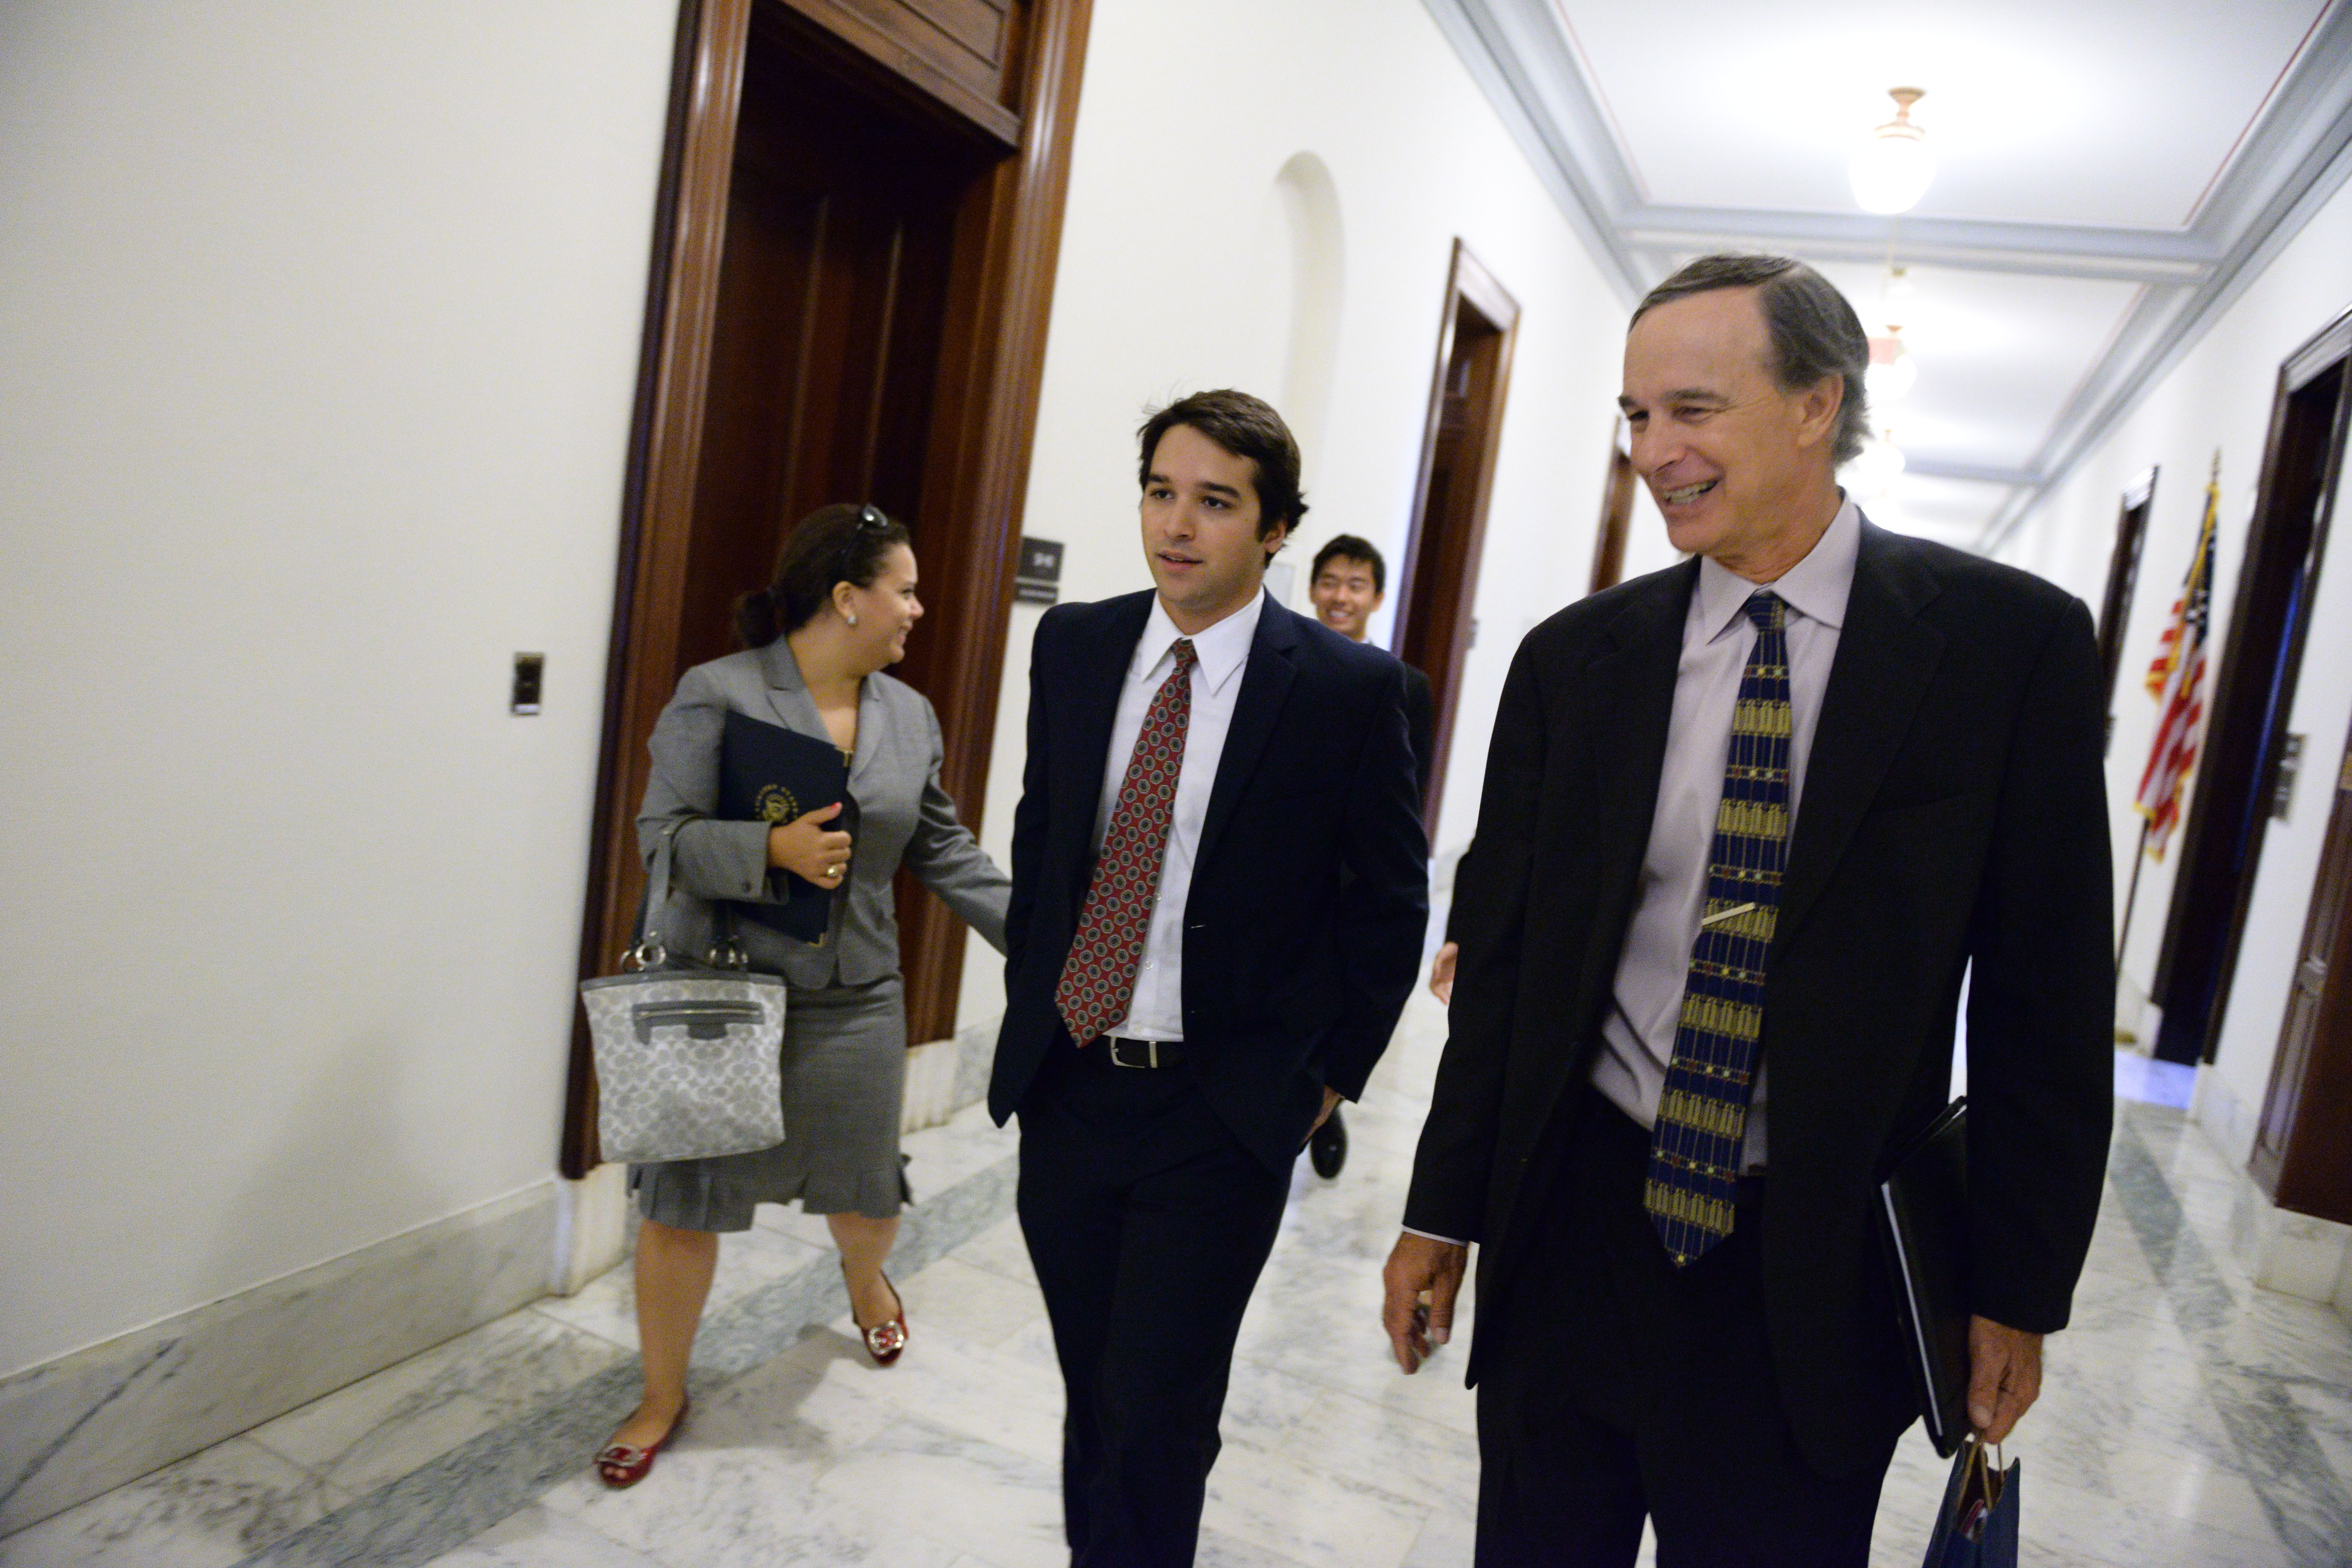  Gerry Warburg, right, walking the Russell Senate building with three UVA students